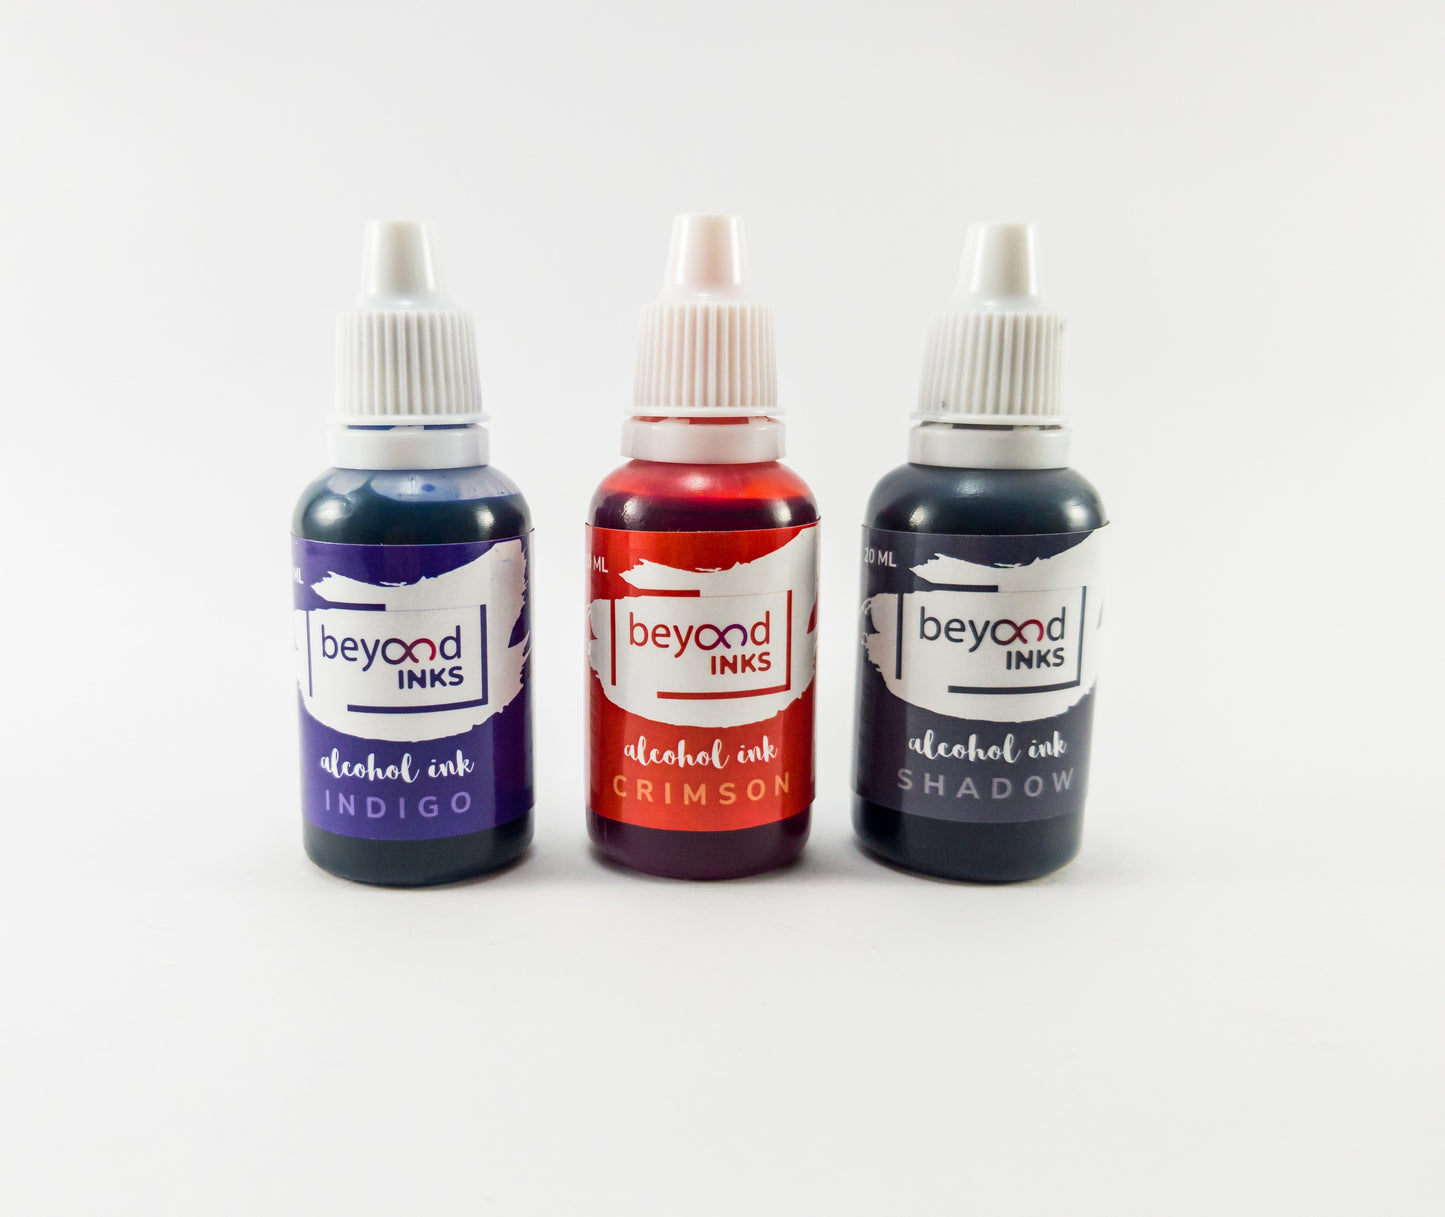 Alcohol Inks, Made in India by BeyondInks Crimson Shadow Indigo Pack3